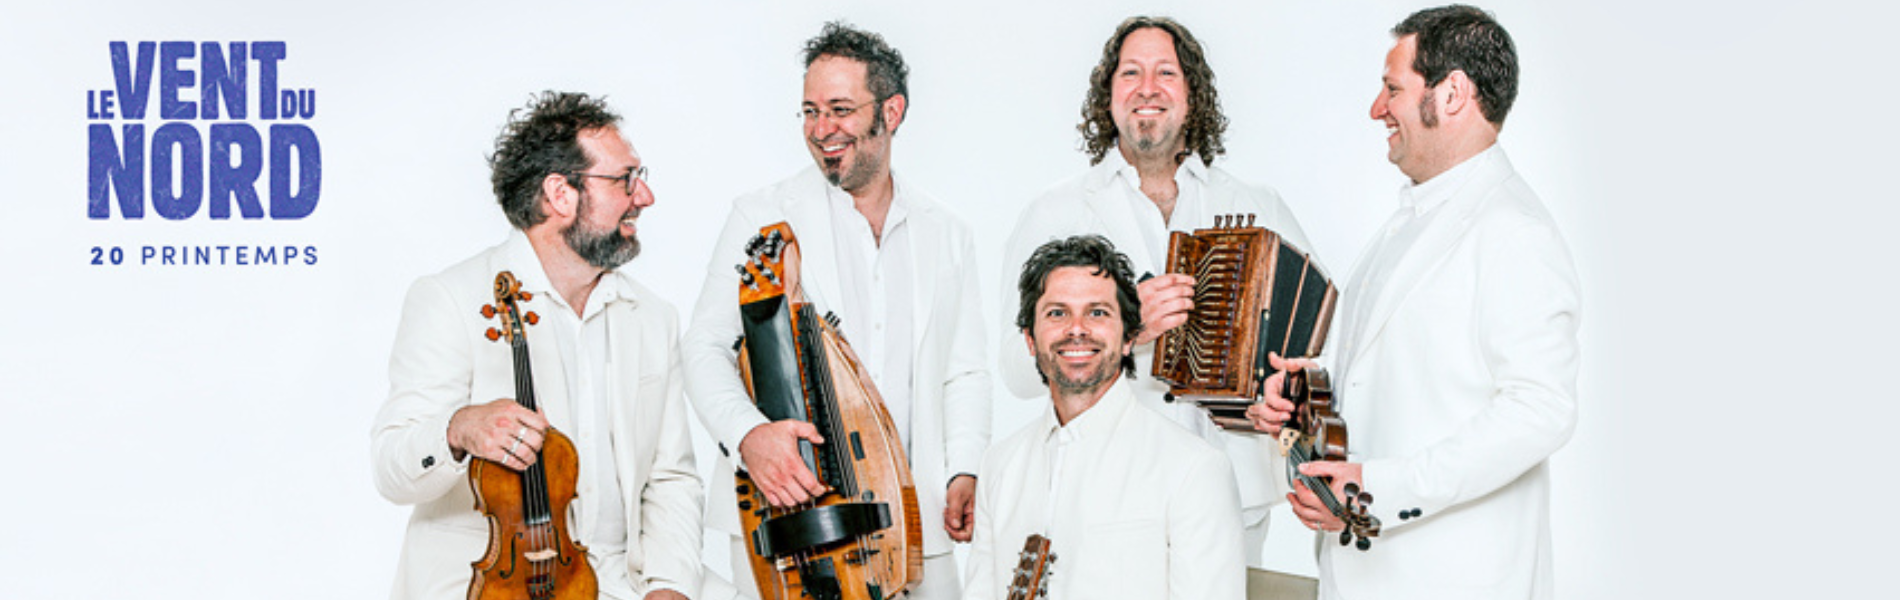 5 members of Vent du Nord dressed in white against a white background each holding instruments